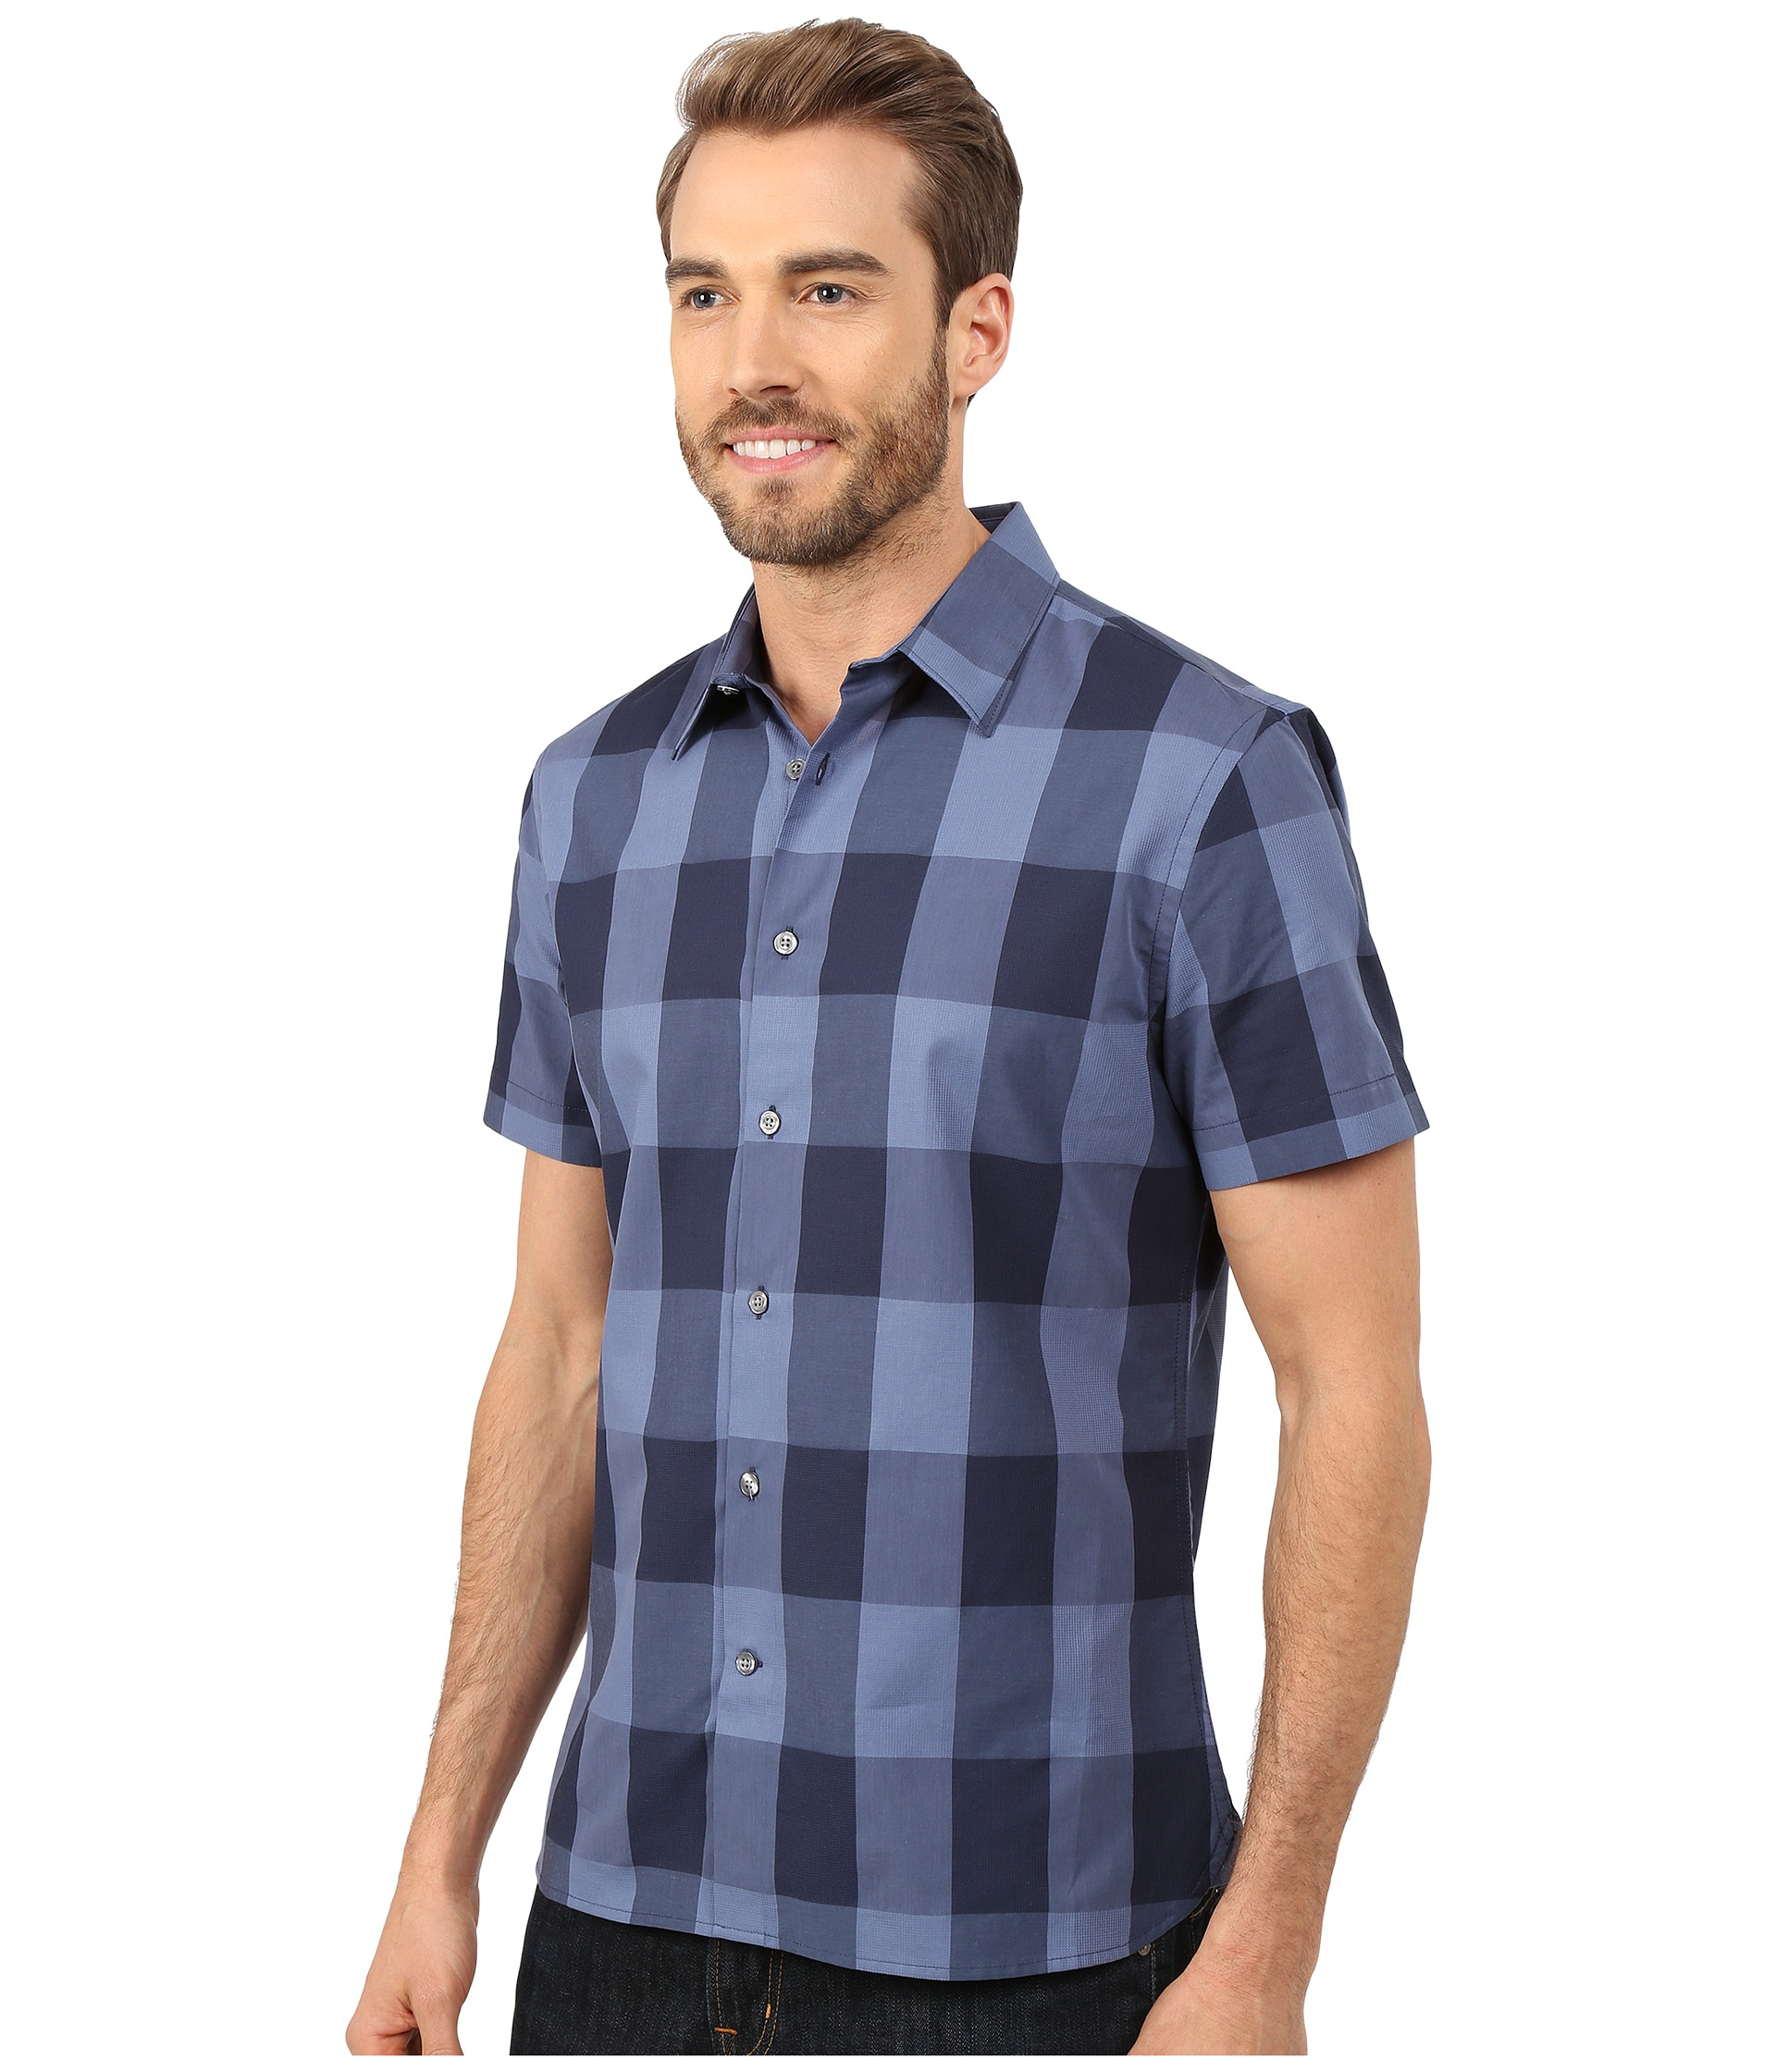 Lyst - Perry Ellis Short Sleeve Large Check Pattern Shirt in Blue for Men